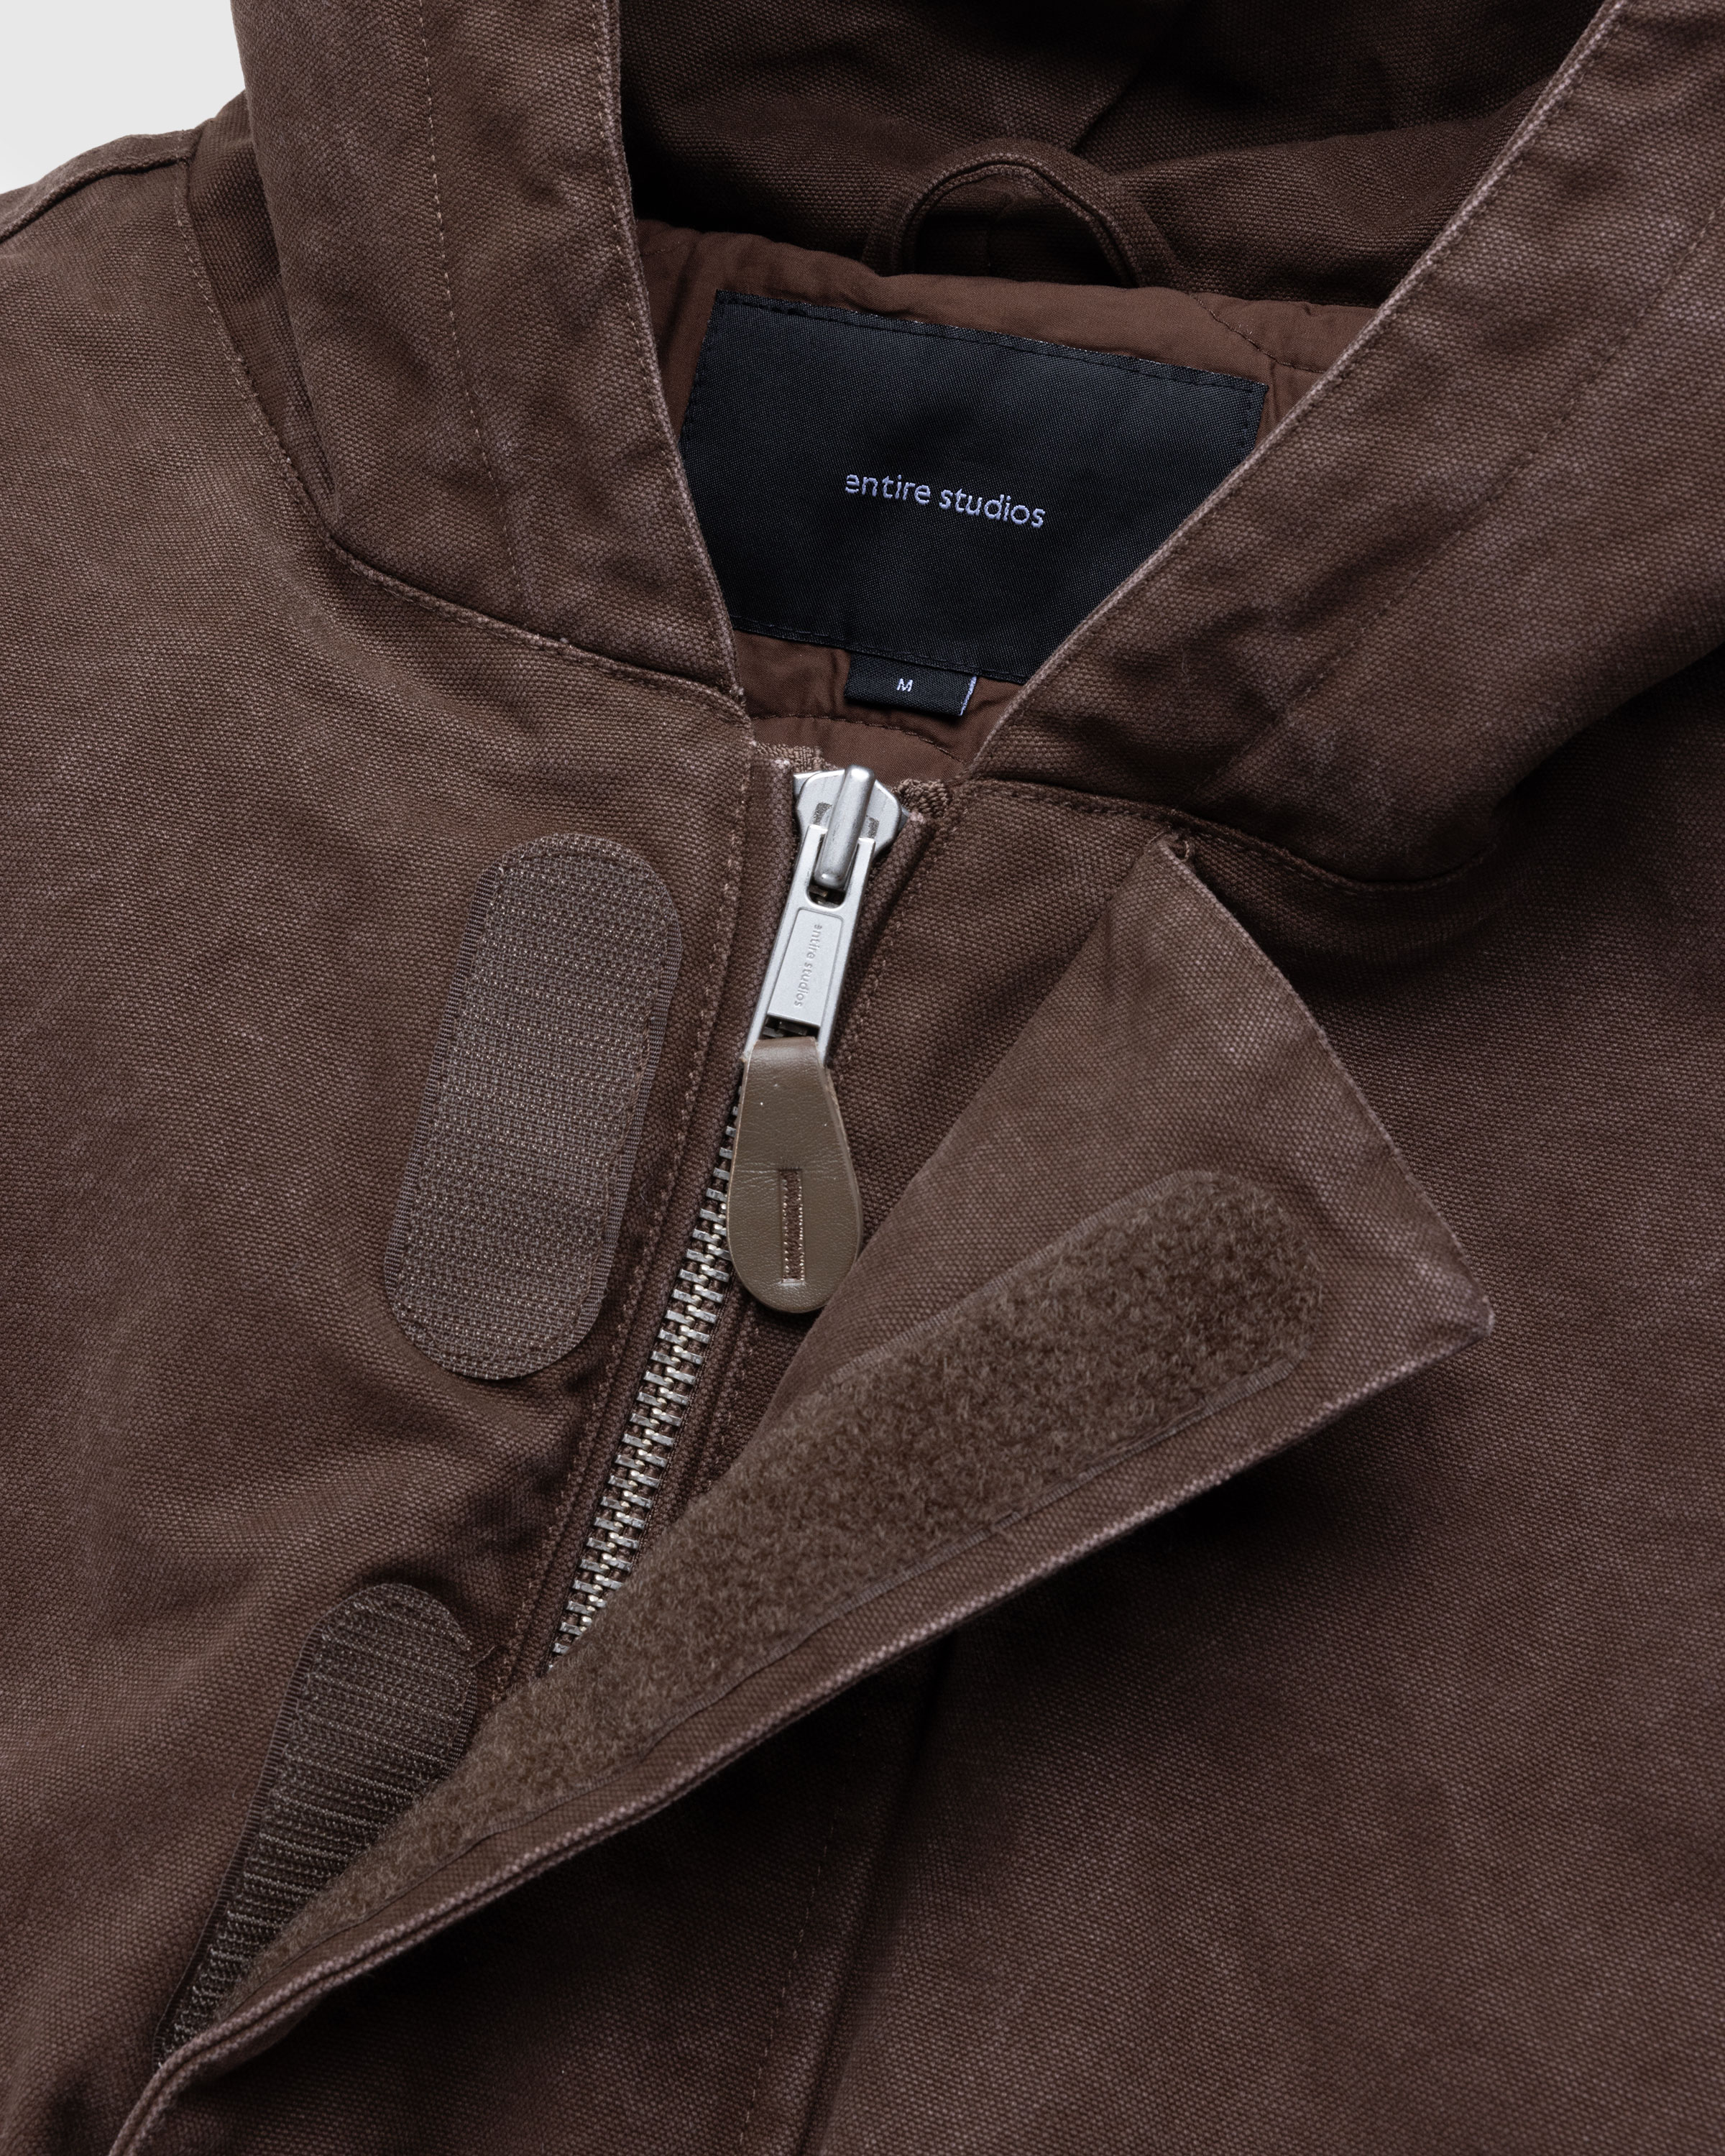 Entire Studios – W2 Bomber Military Mud - Outerwear - Brown - Image 6